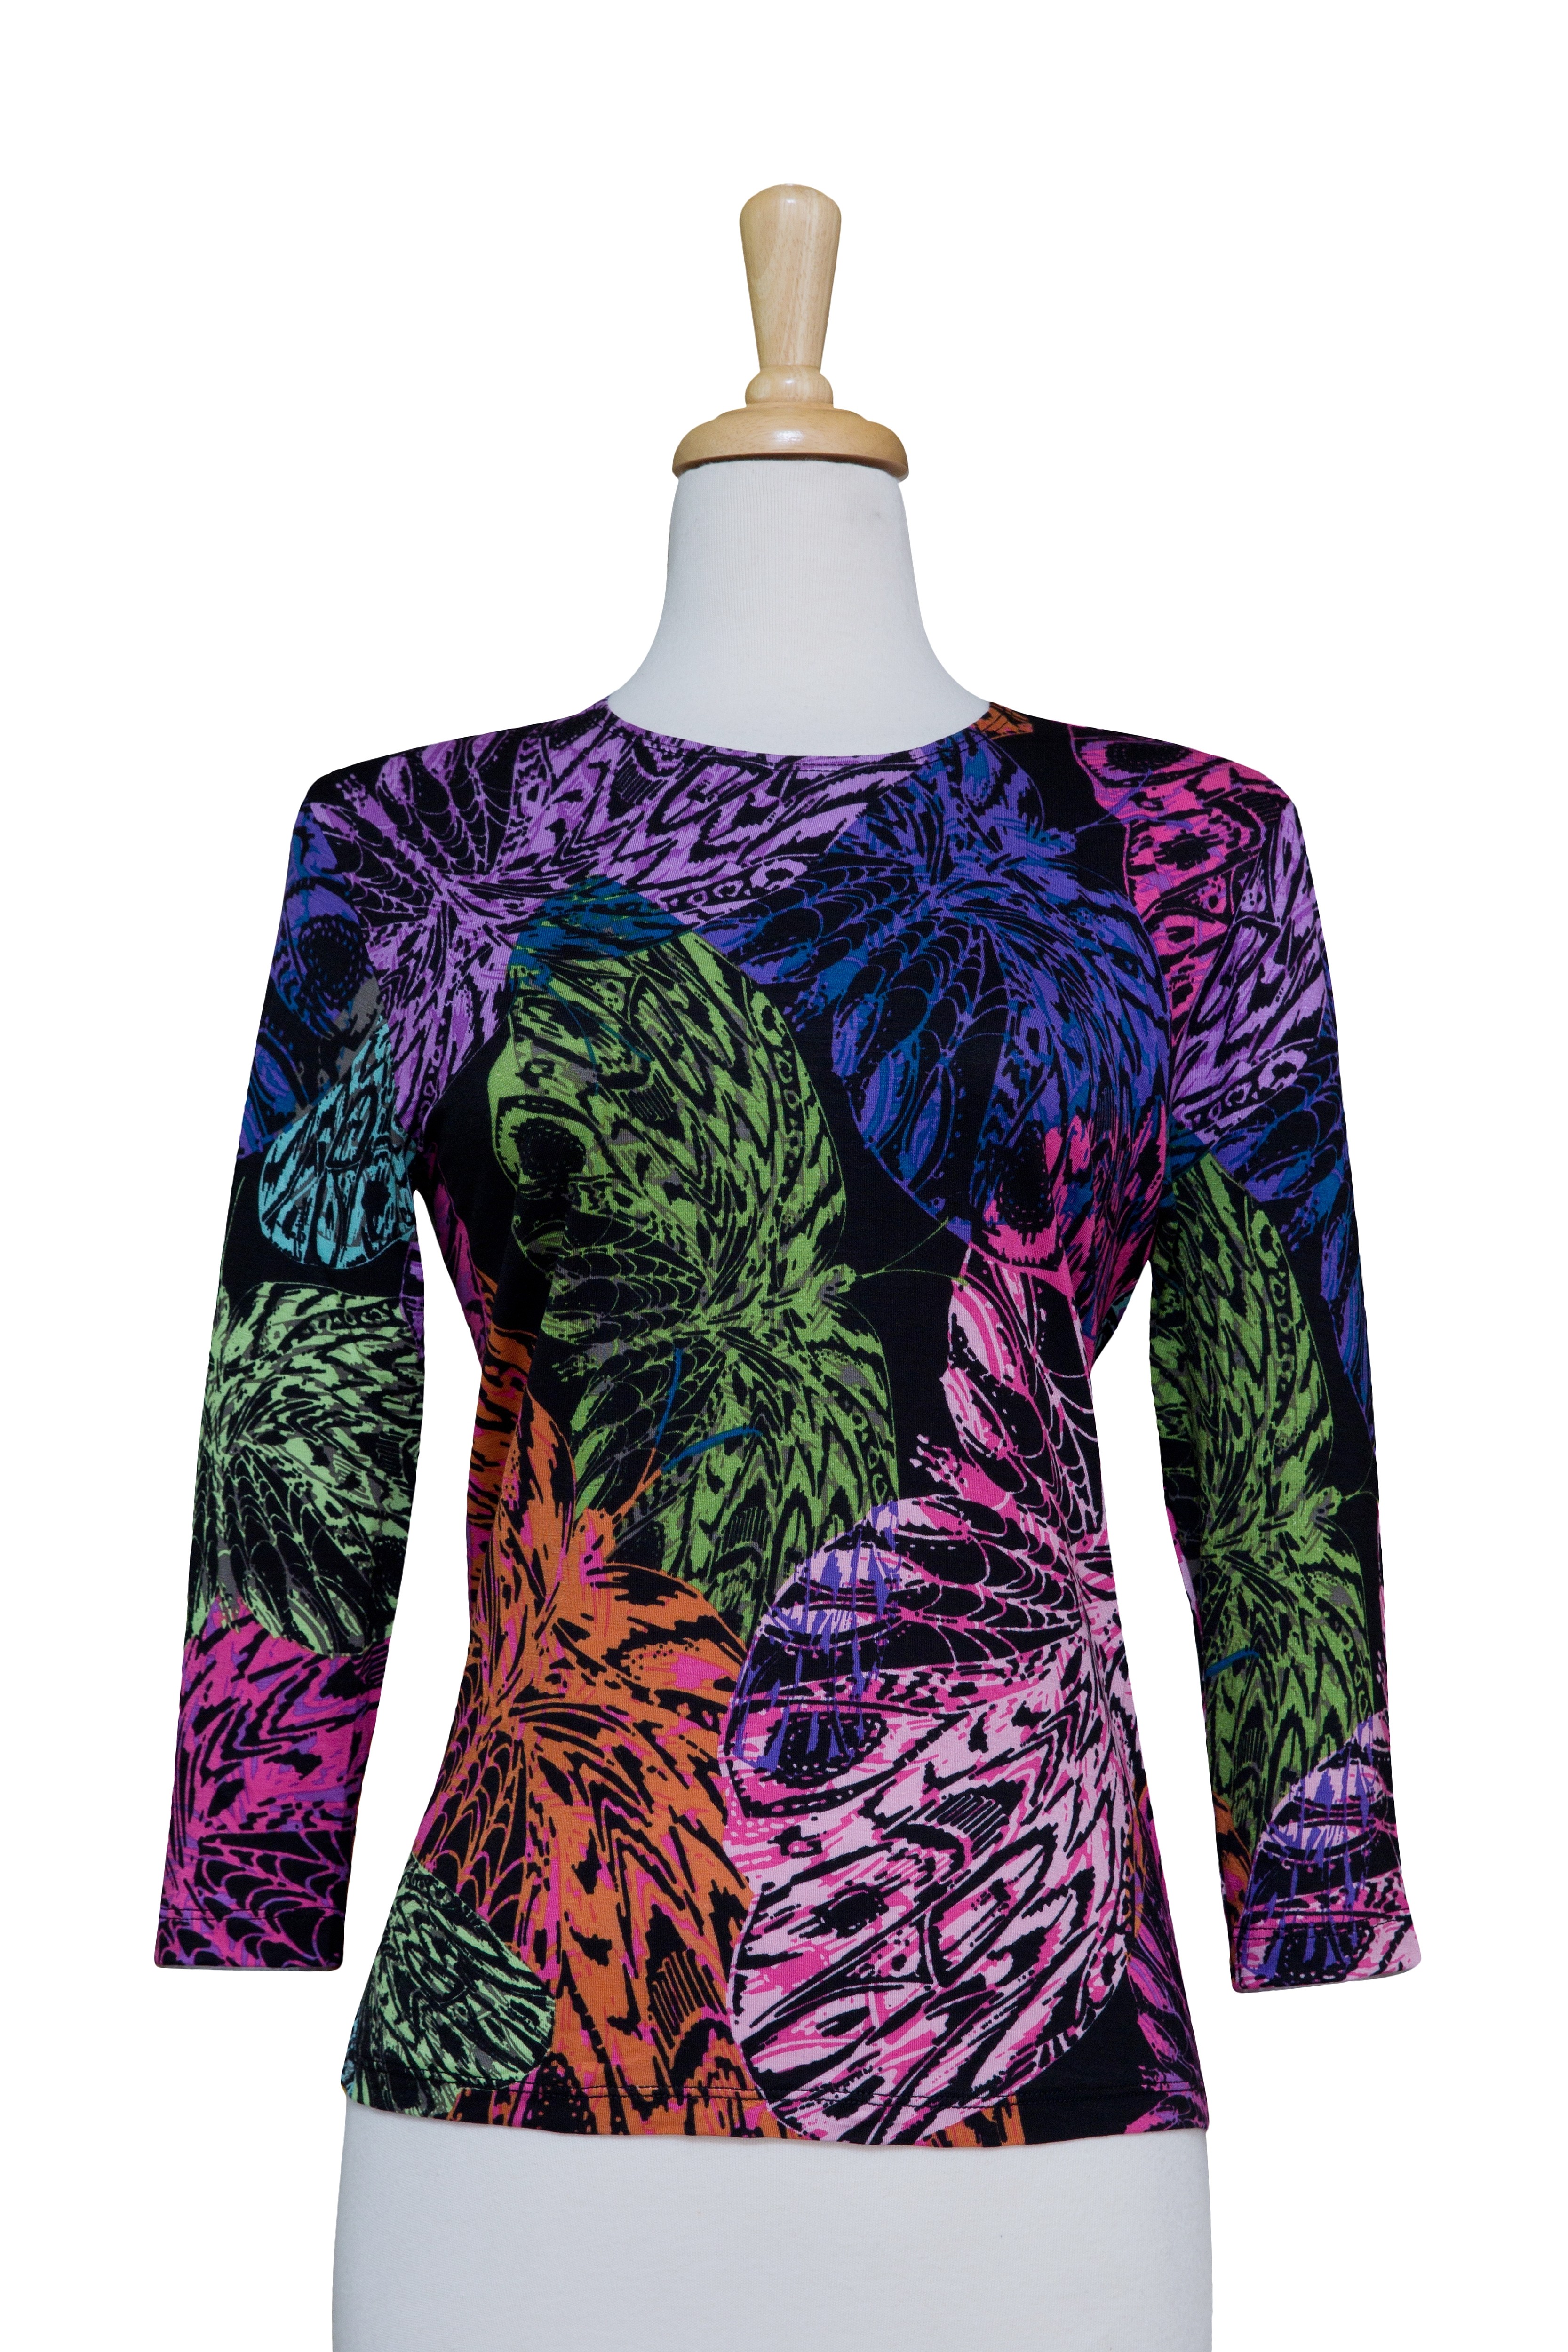 Black with Multi Colored Display of Leaves 3/4 Sleeve  Cotton Top 